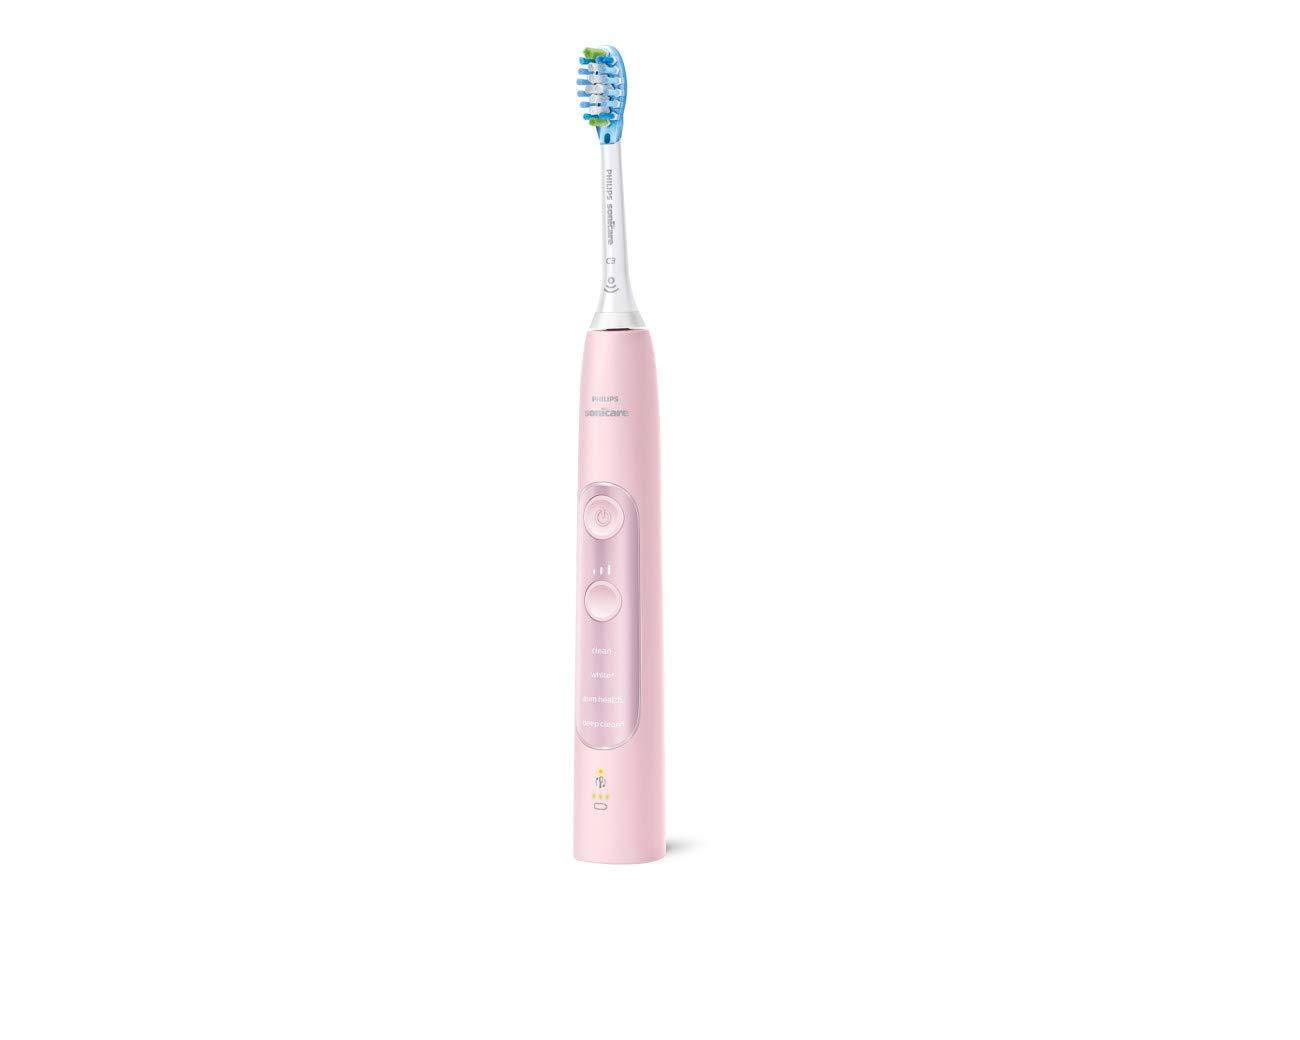 Philips Sonicare ExpertClean 7500 Rechargeable Electric Toothbrush, Pink  HX9690/07